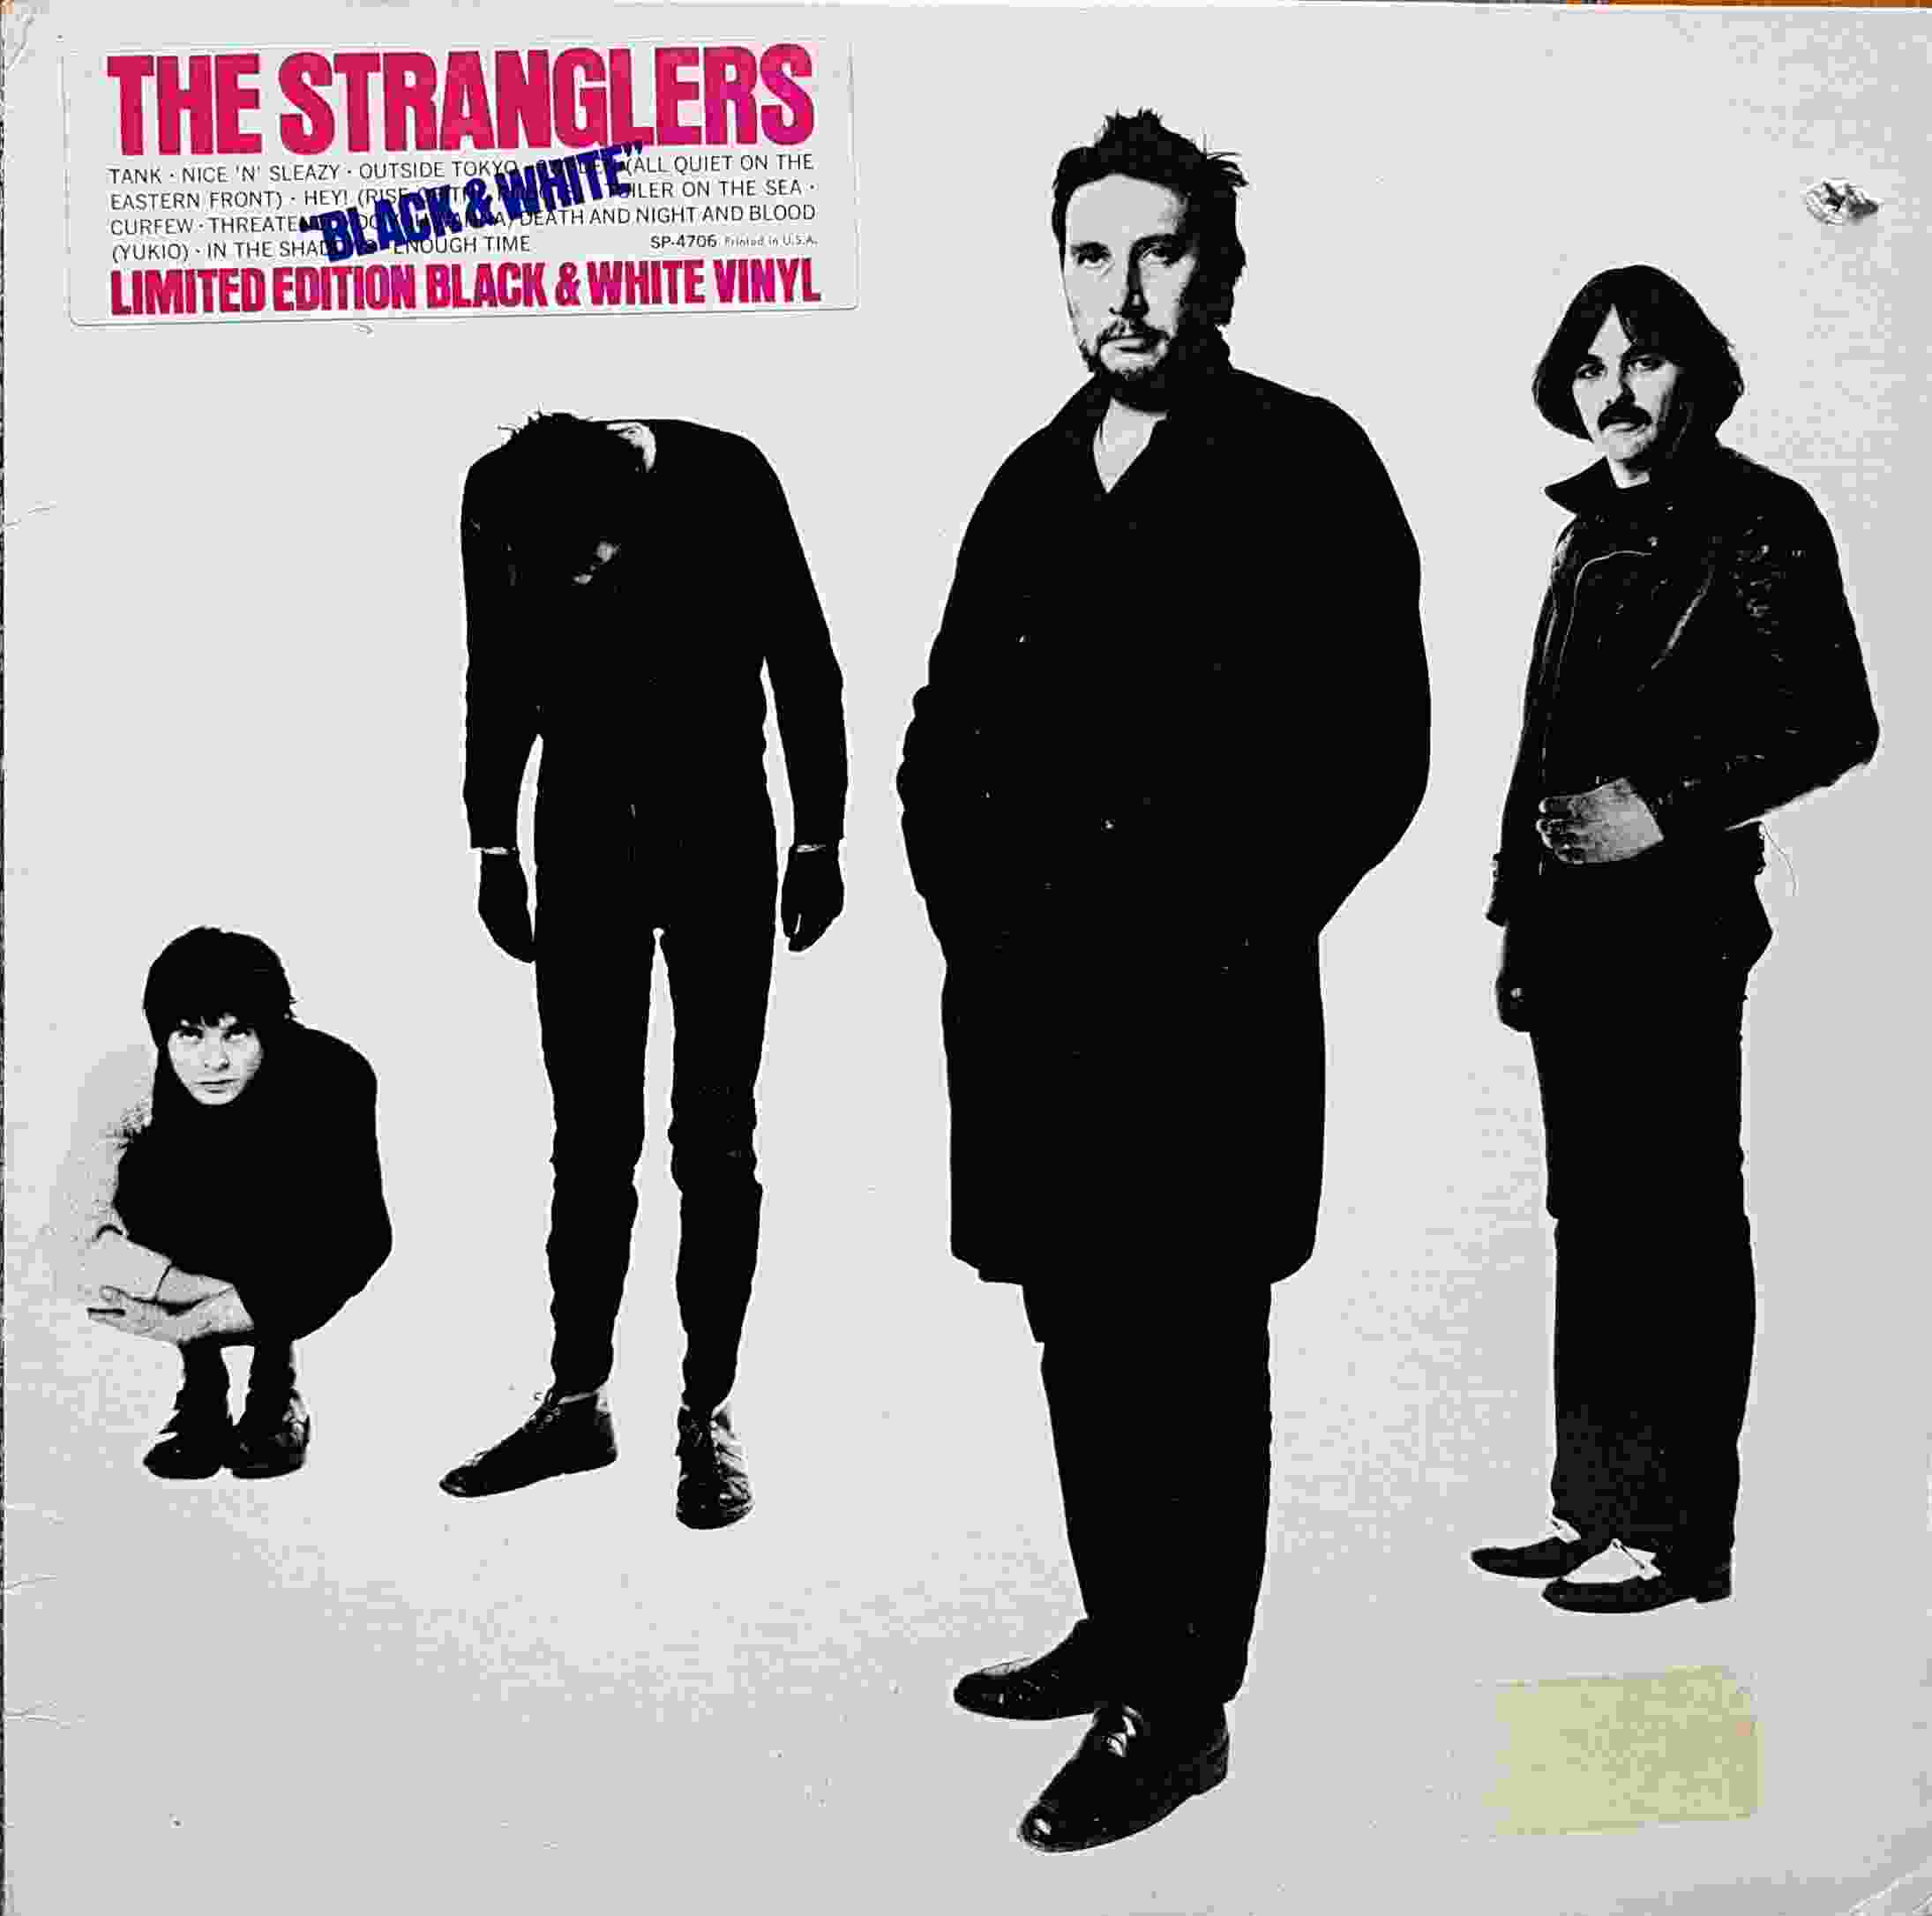 Picture of SP 4706 P Black and white by artist The Stranglers  from The Stranglers